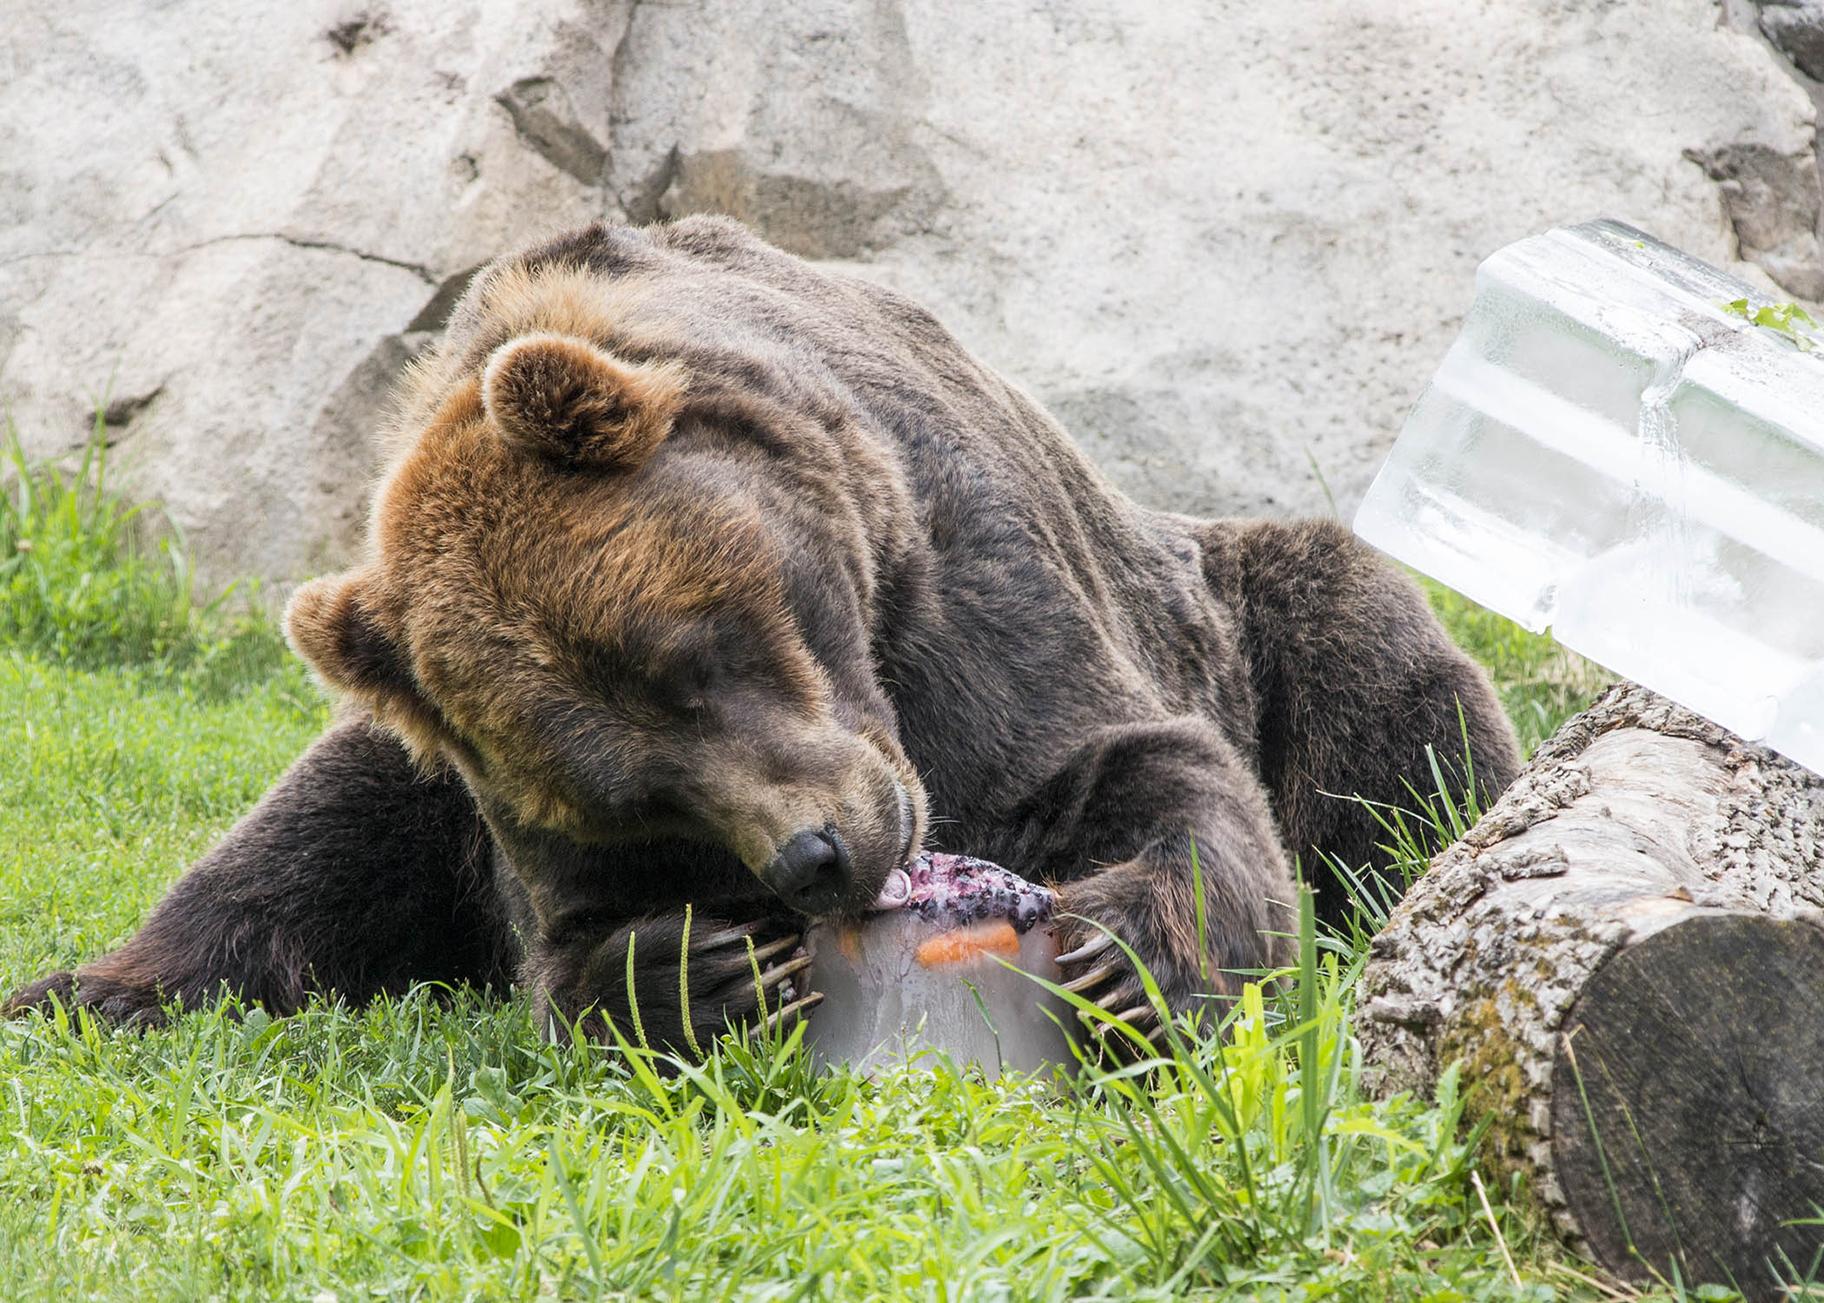 Grizzly bear Axhi plays with an ice treat filled with a variety of fruit. (Kelly Tone / Chicago Zoological Society) 